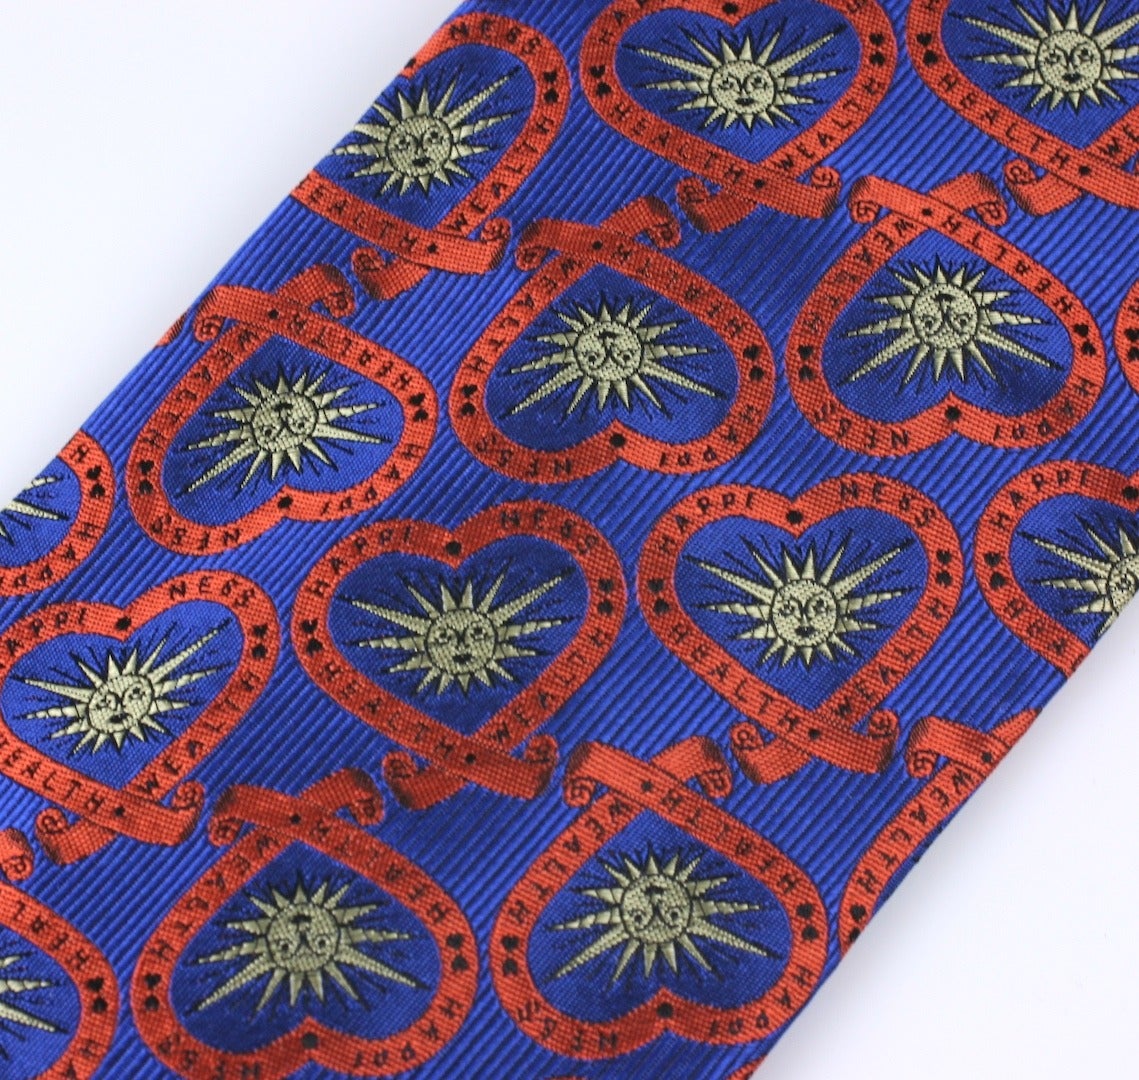 Moschino Heart Motif Tie with woven expressions of Happiness, Health and Wealth all surrounding an abstract sun motif. 
2000's Italy. Excellent condition, unworn.